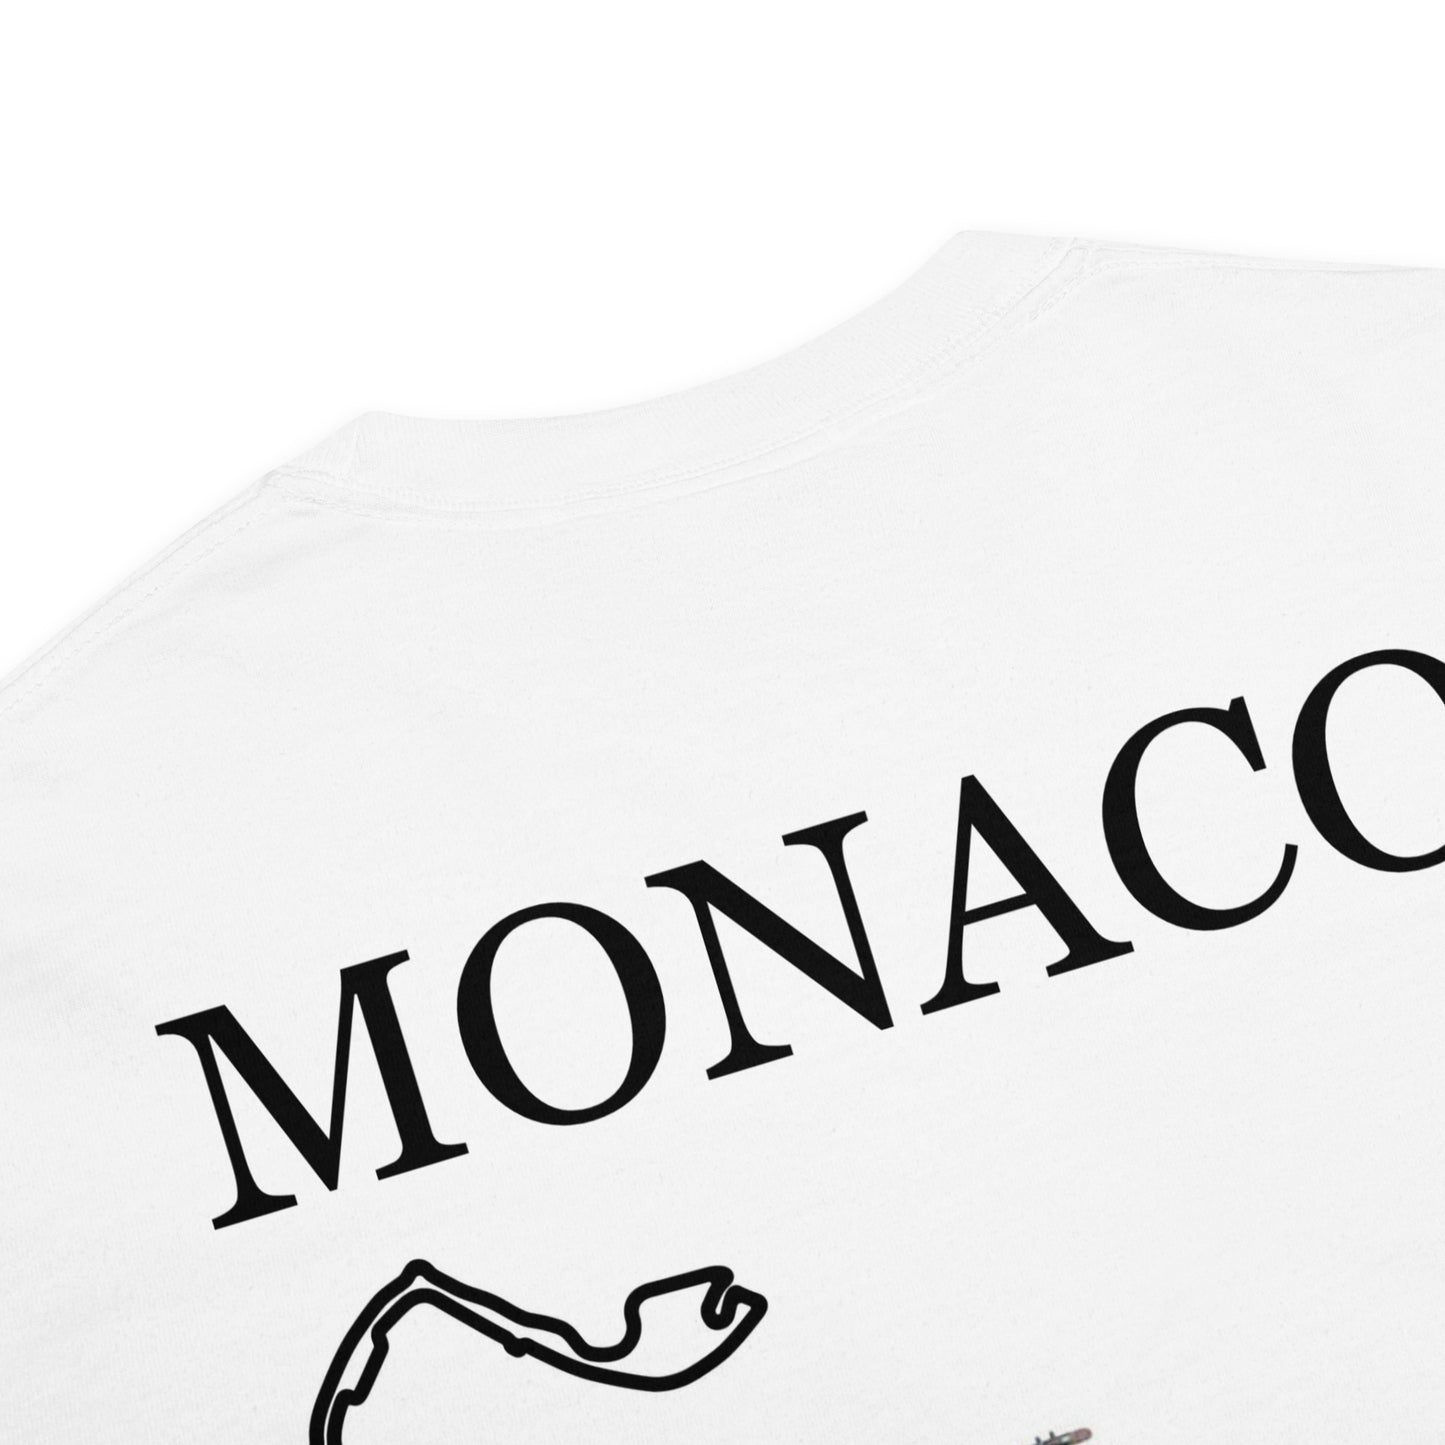 Forever The King of Monaco Tee